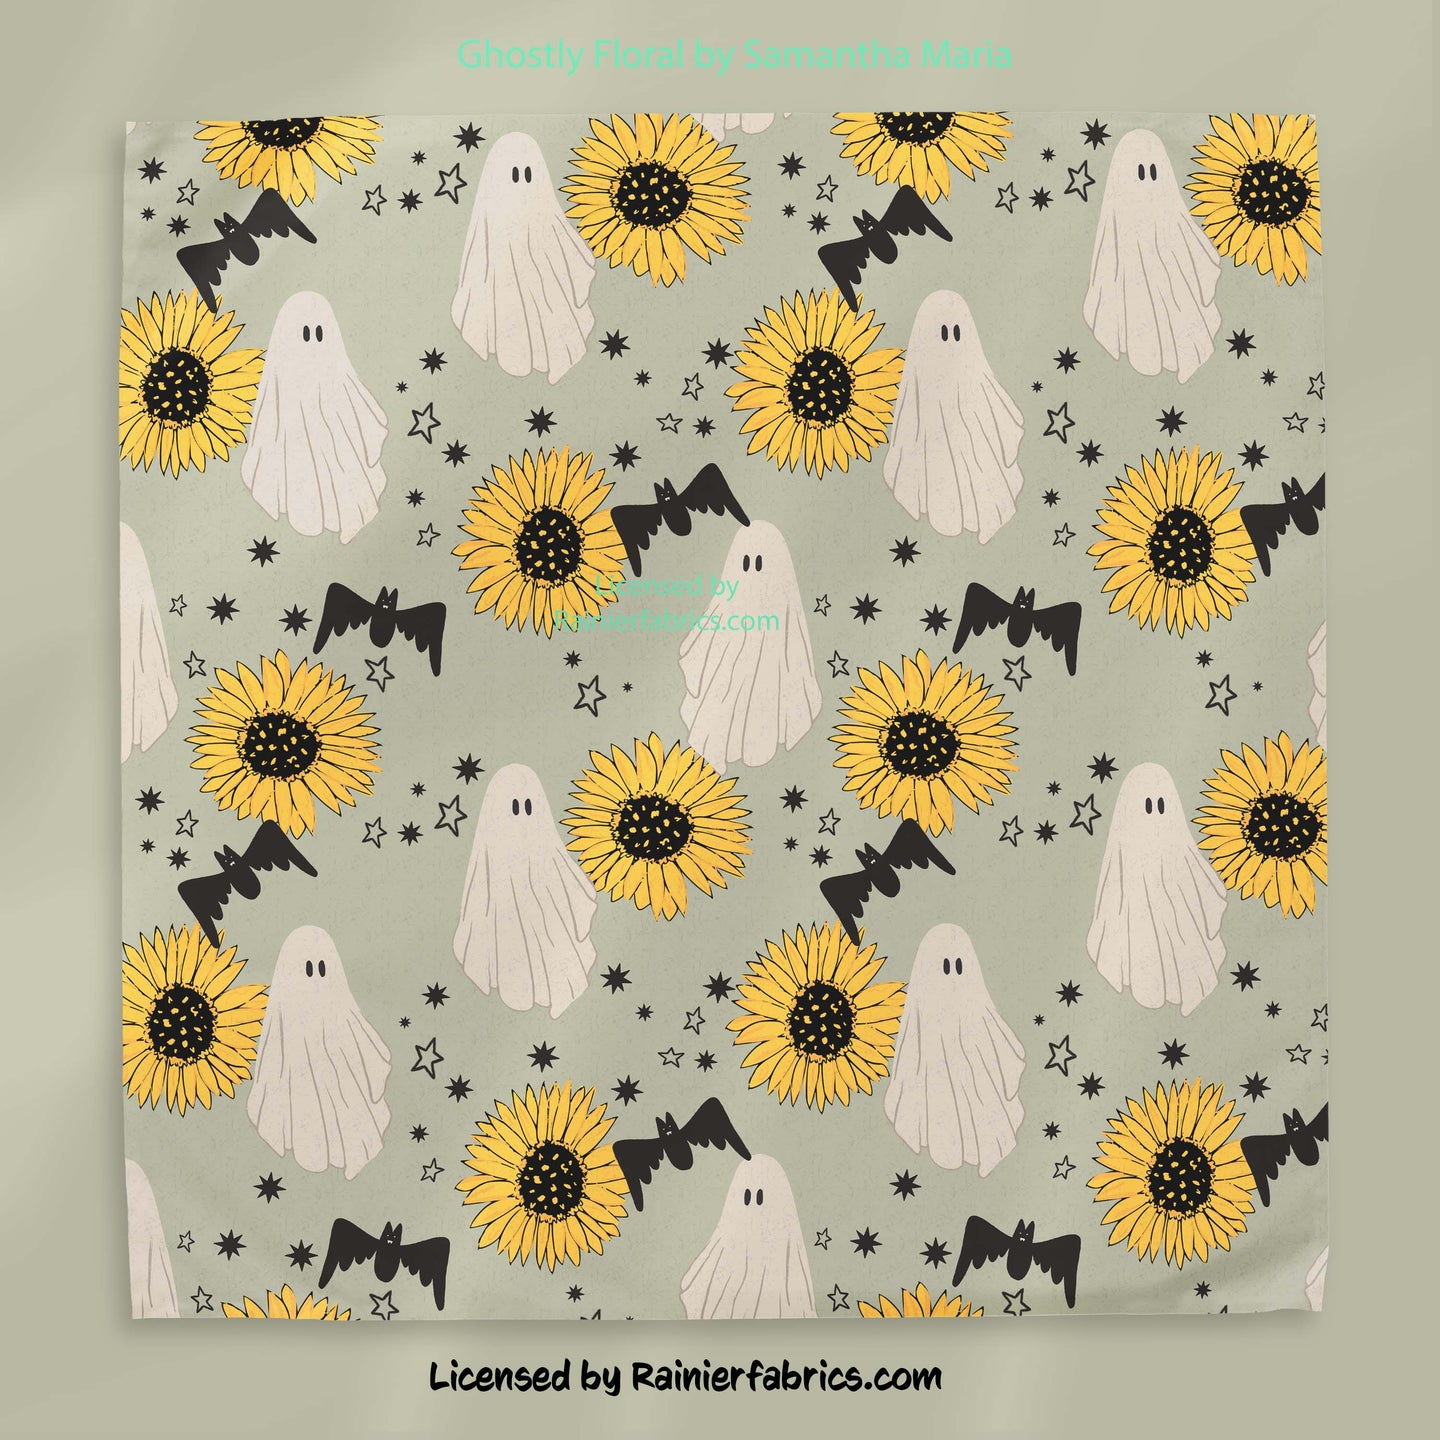 Ghostly Floral by Samantha Marie - 2-5 business days to ship - Order by 1/2 yard